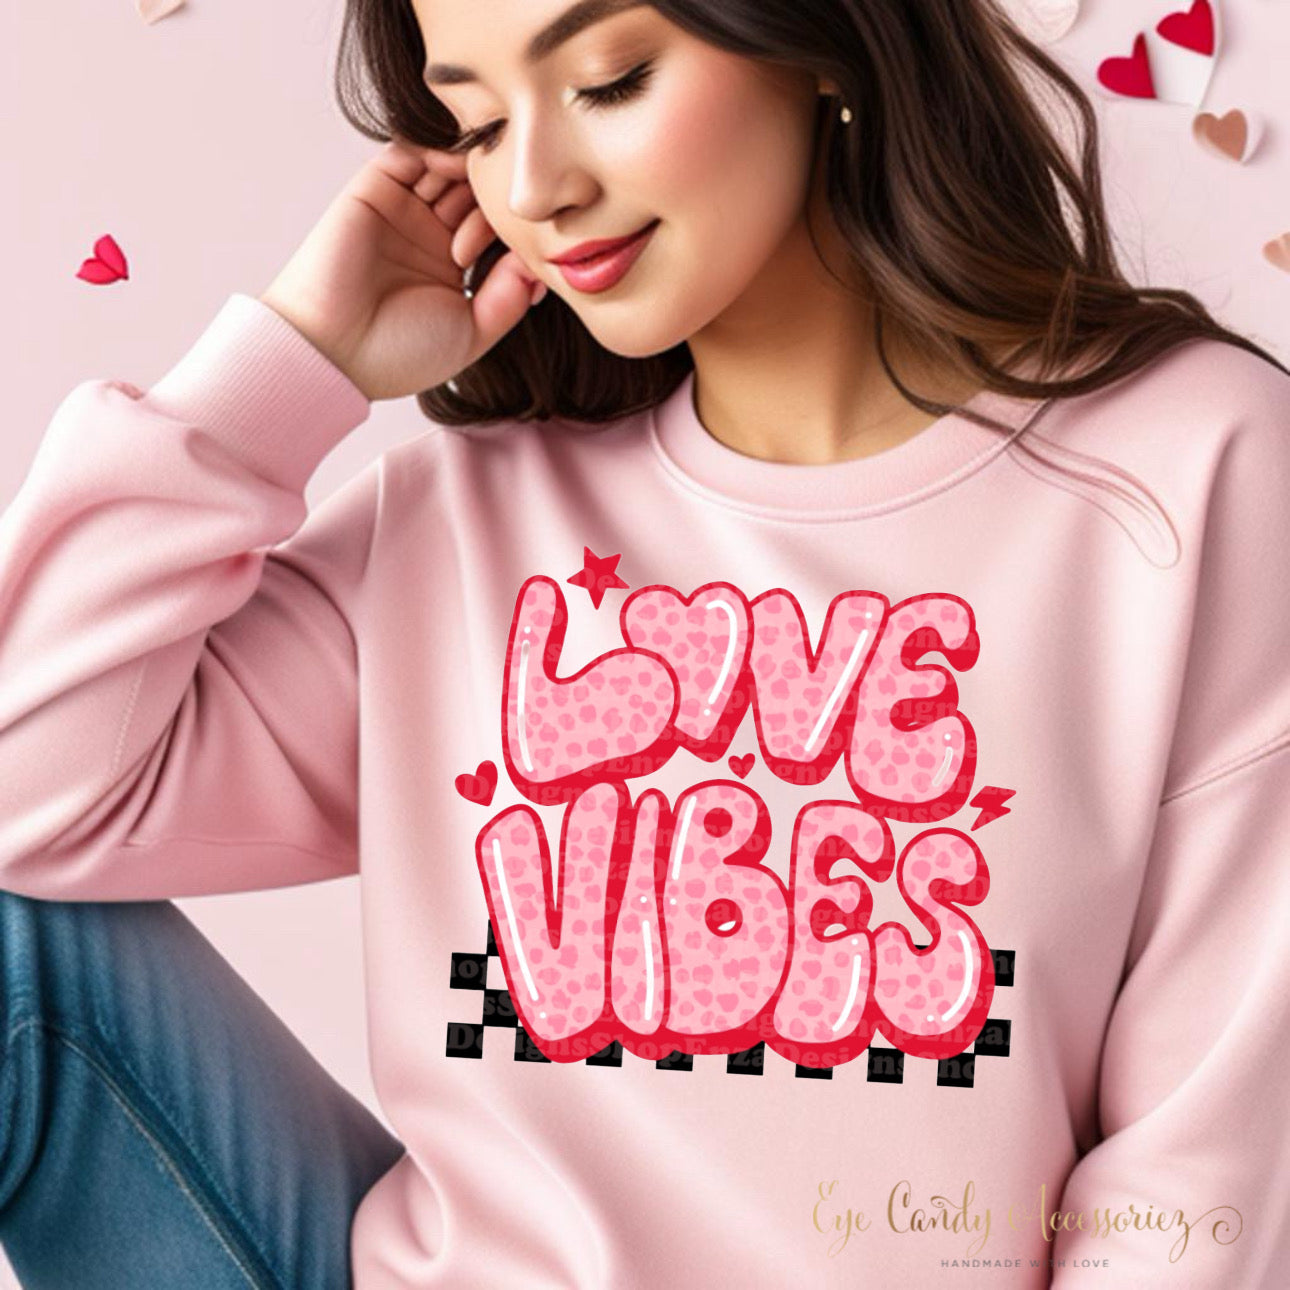 Love Vibes - T-Shirt|Sweater- Adult